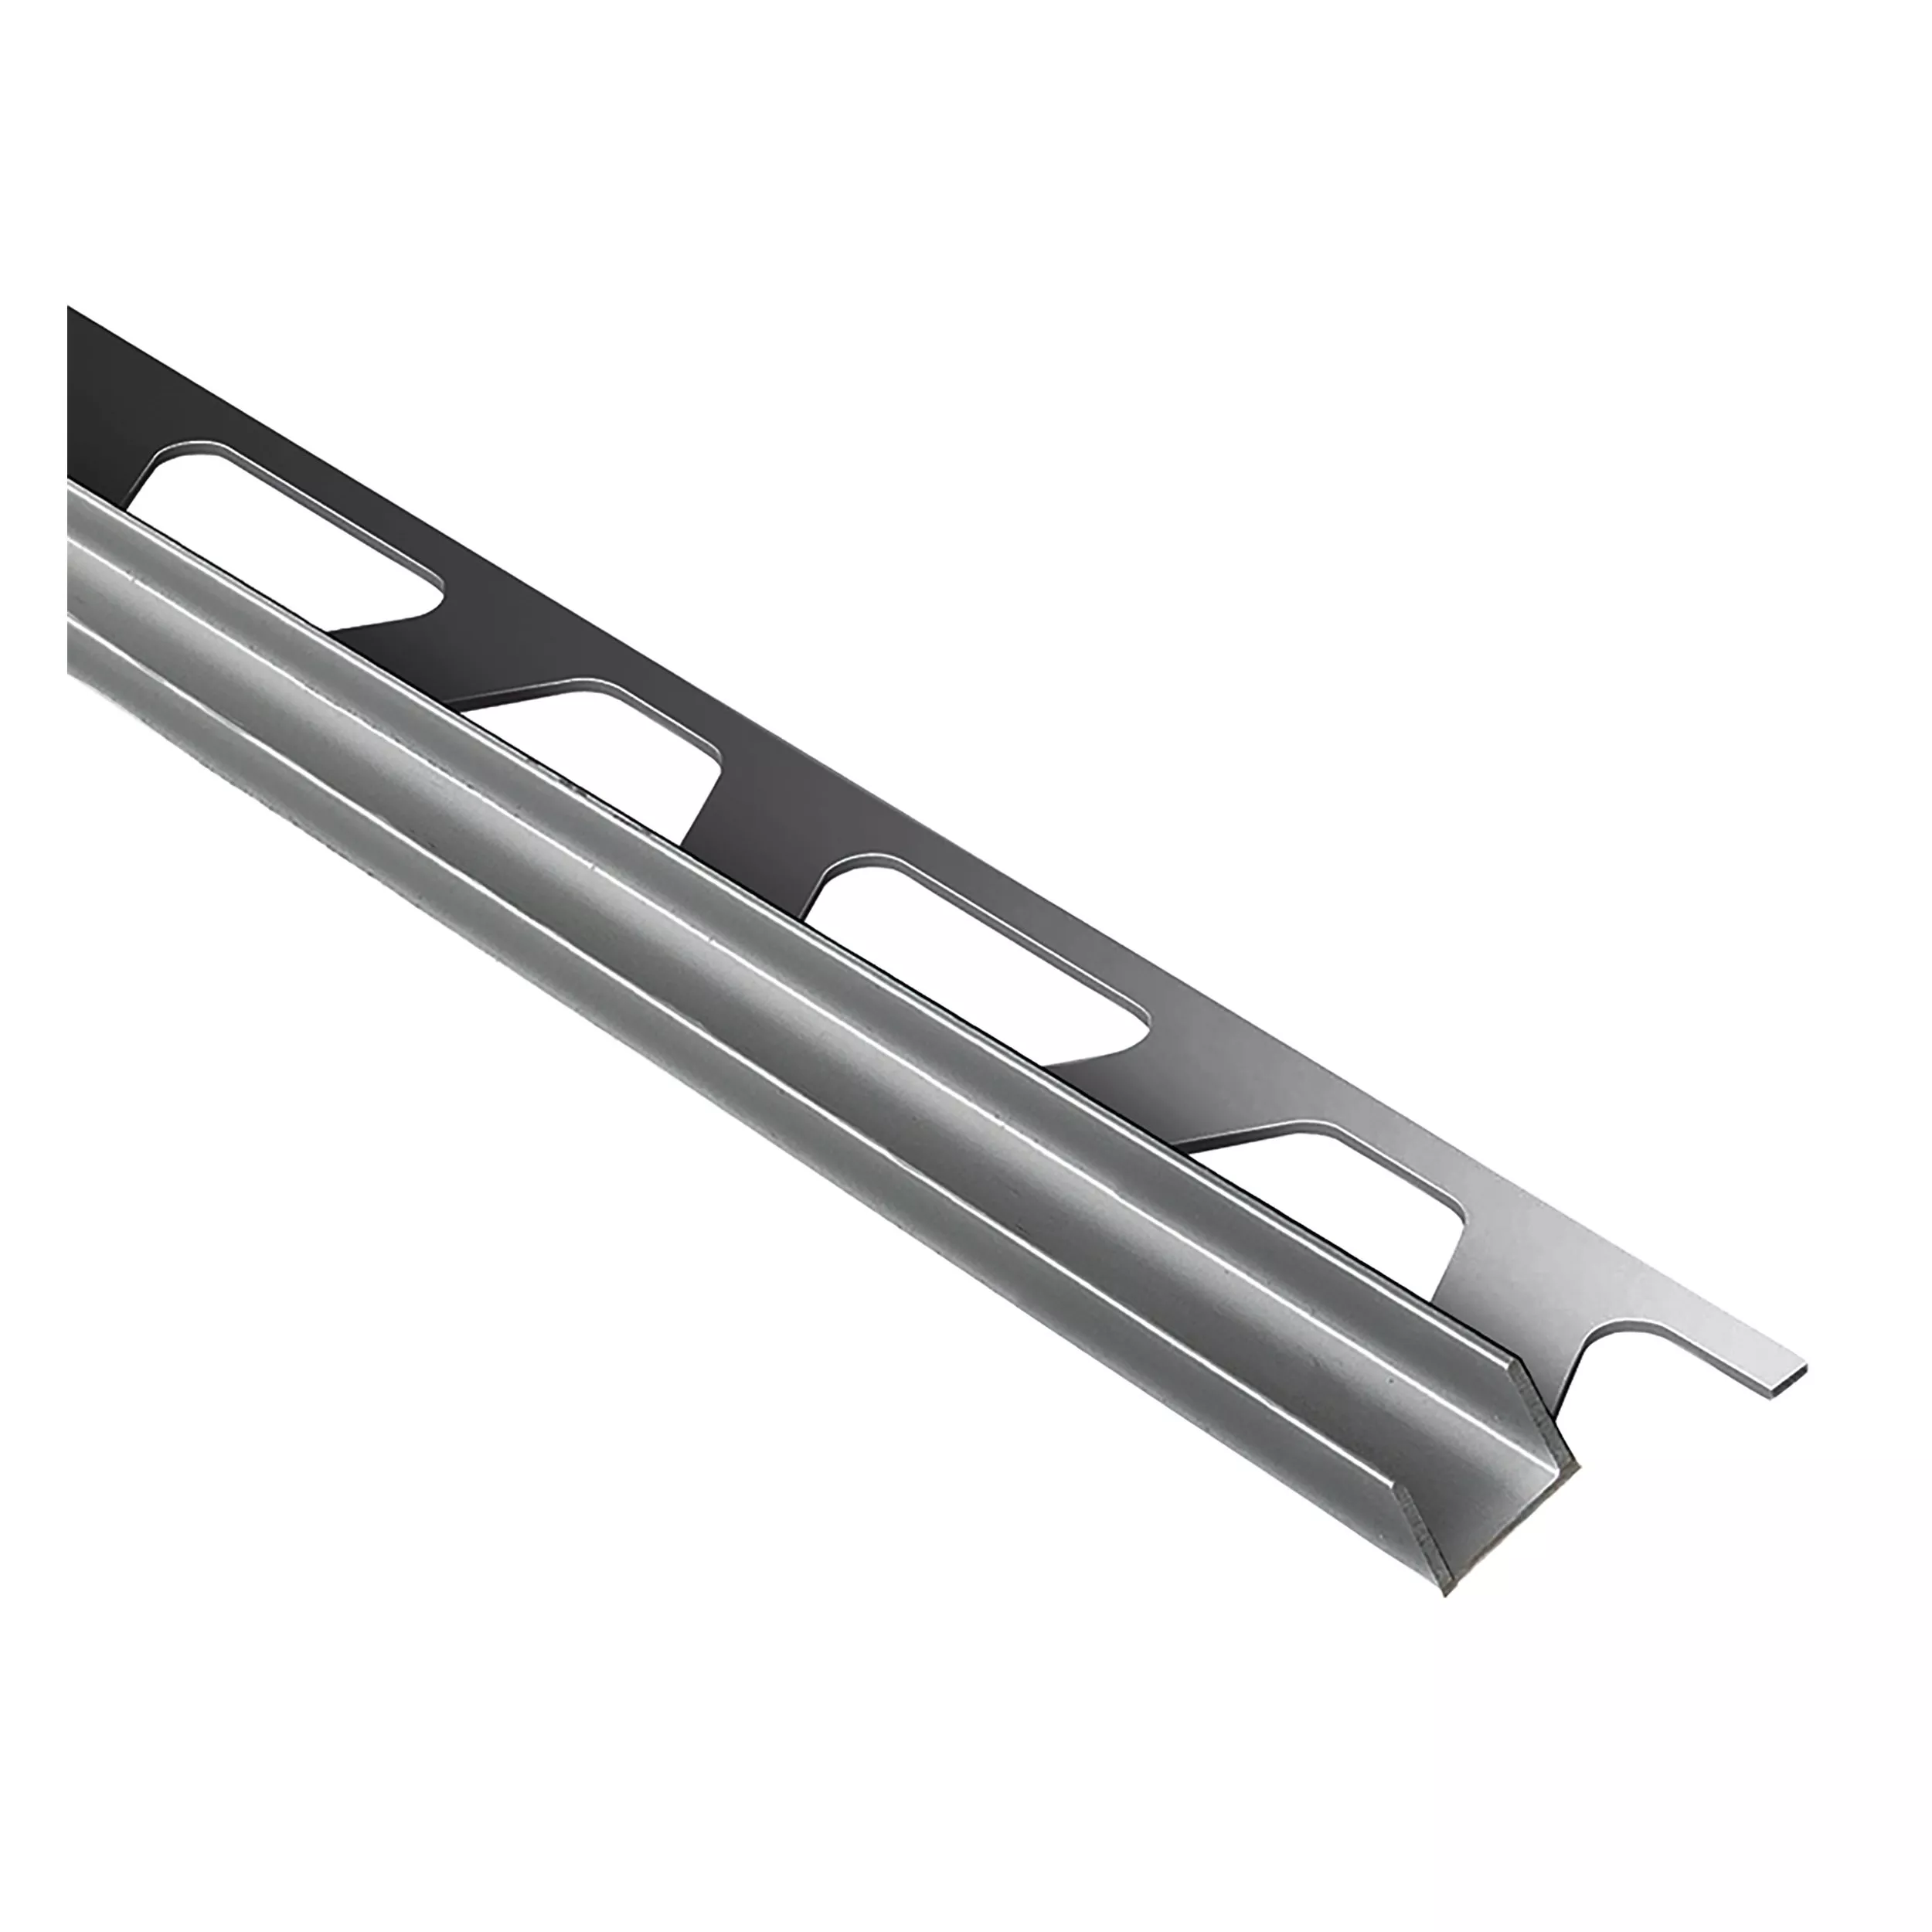 Schluter Deco-Sg 7/16in. Brushed Stainless Steel 15mm